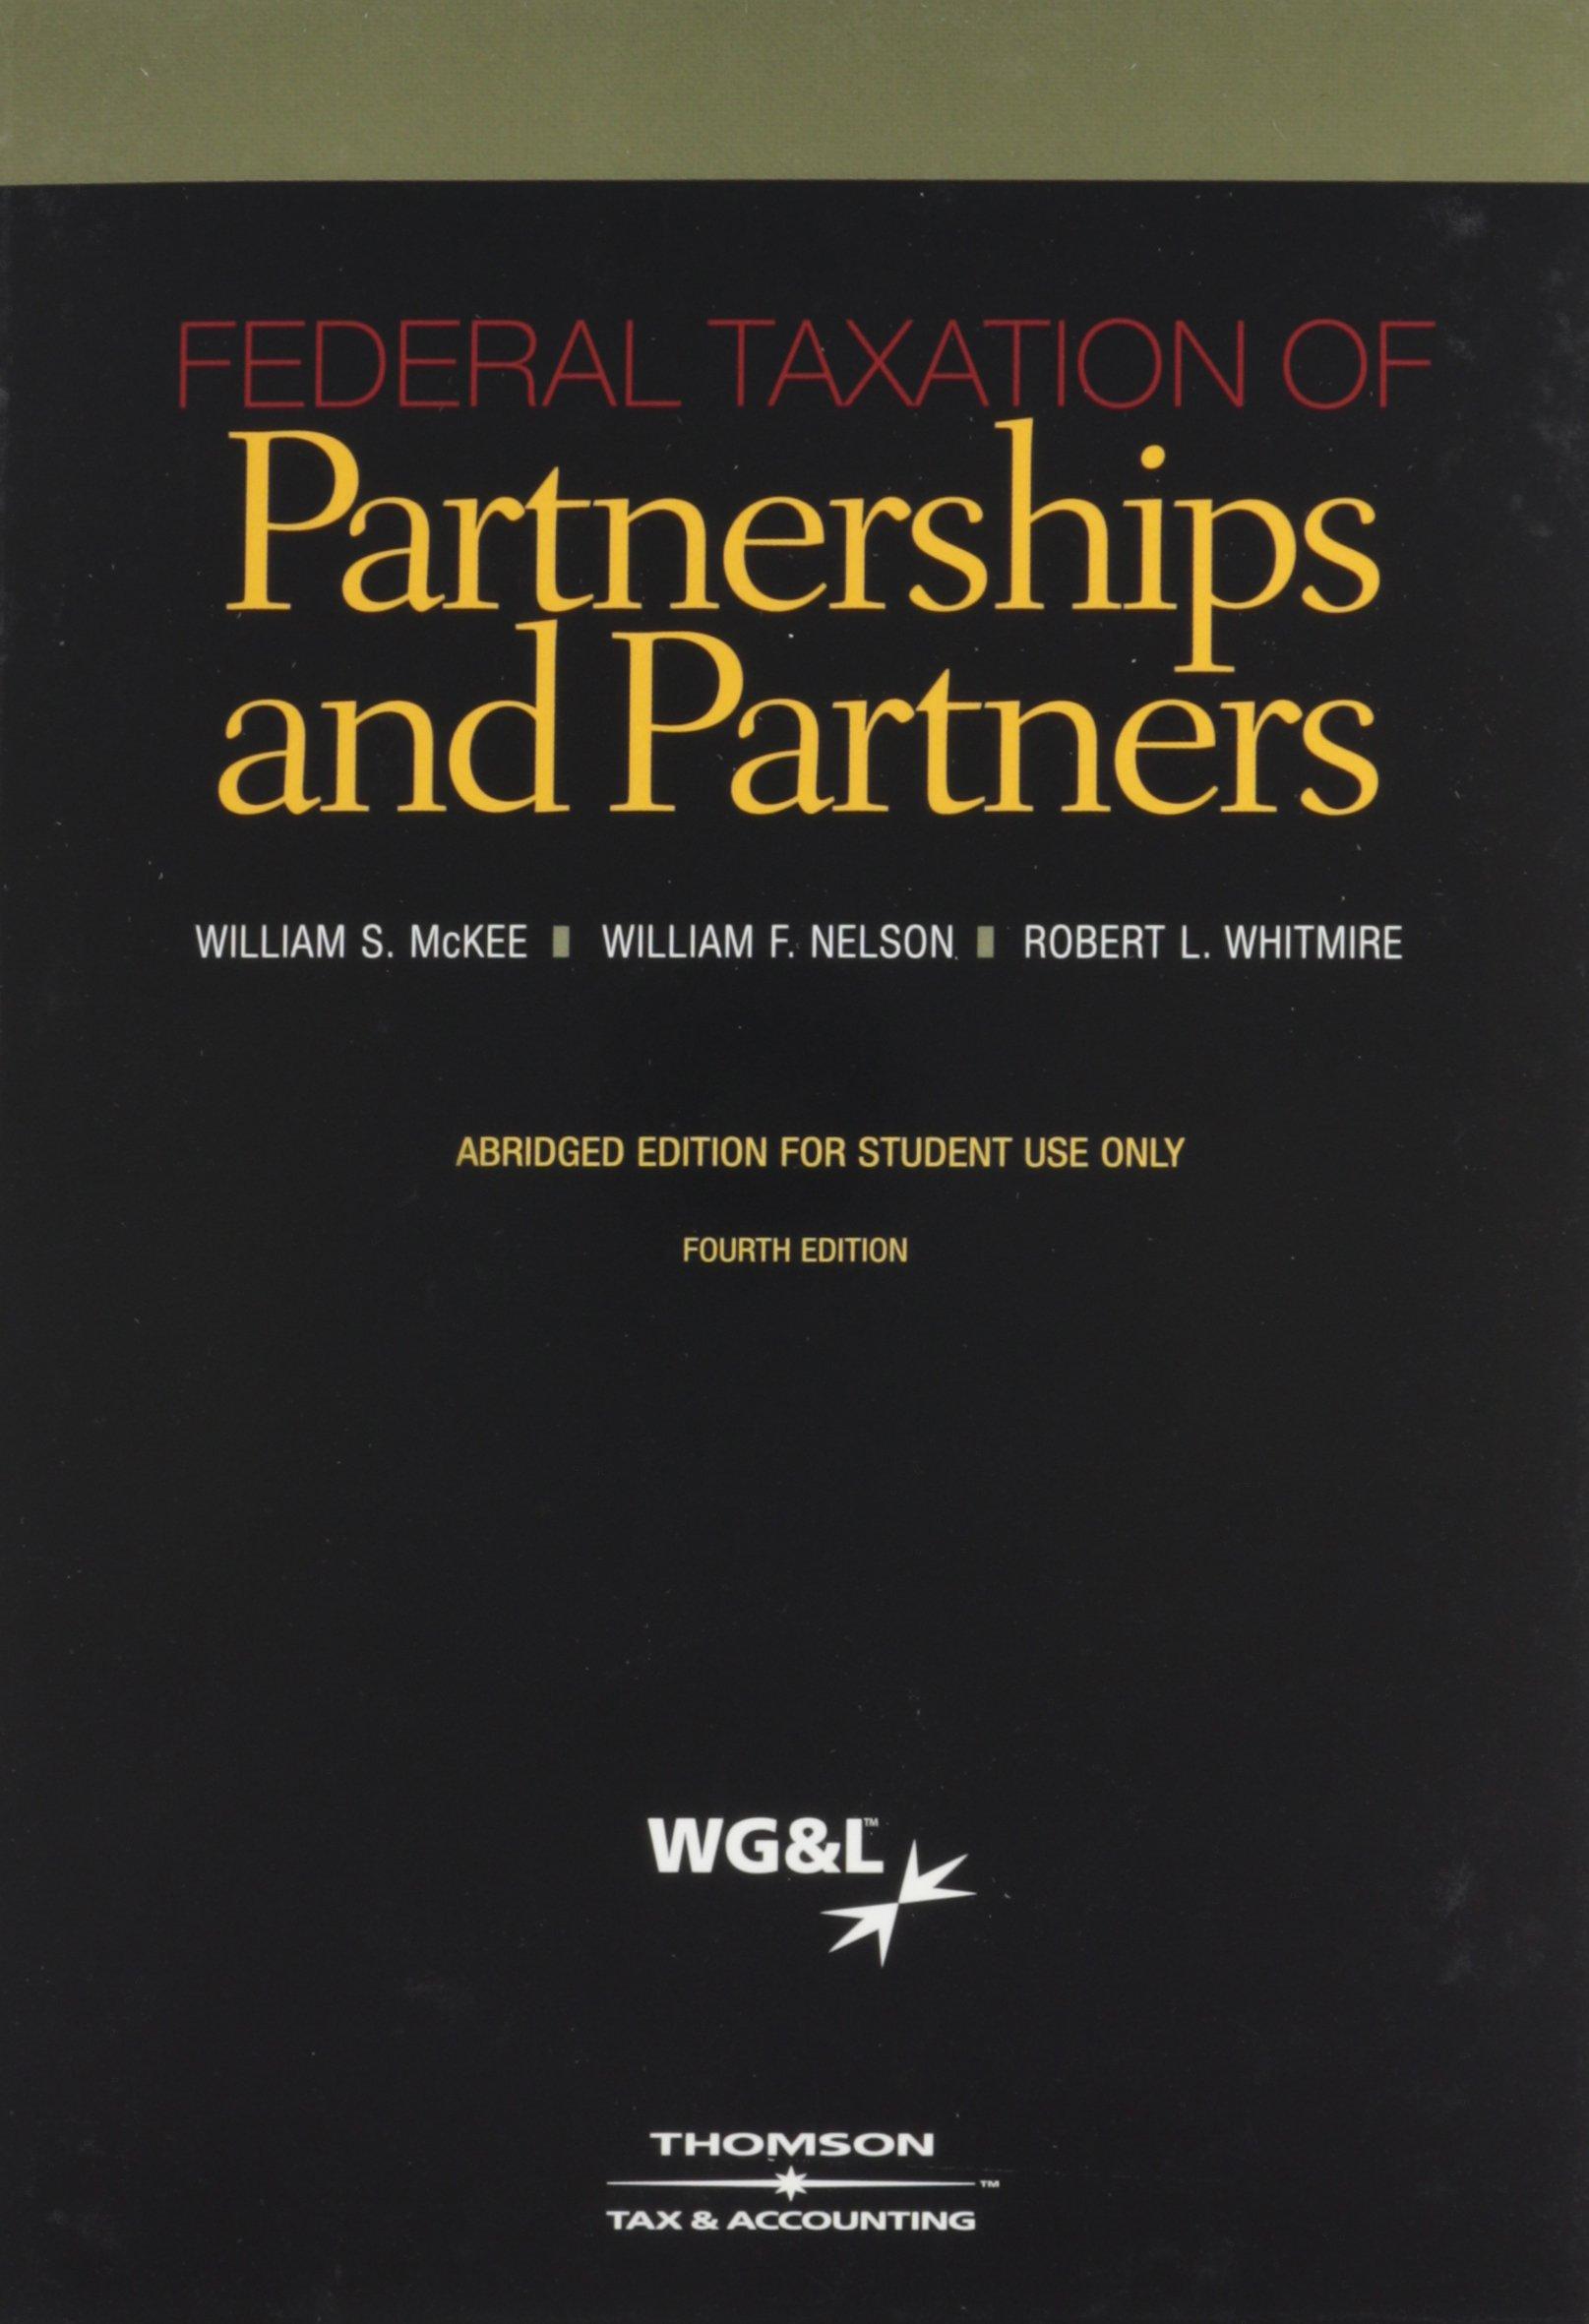 federal taxation of partnerships and partners 4th edition william s. mckee, william f. nelson, robert l.